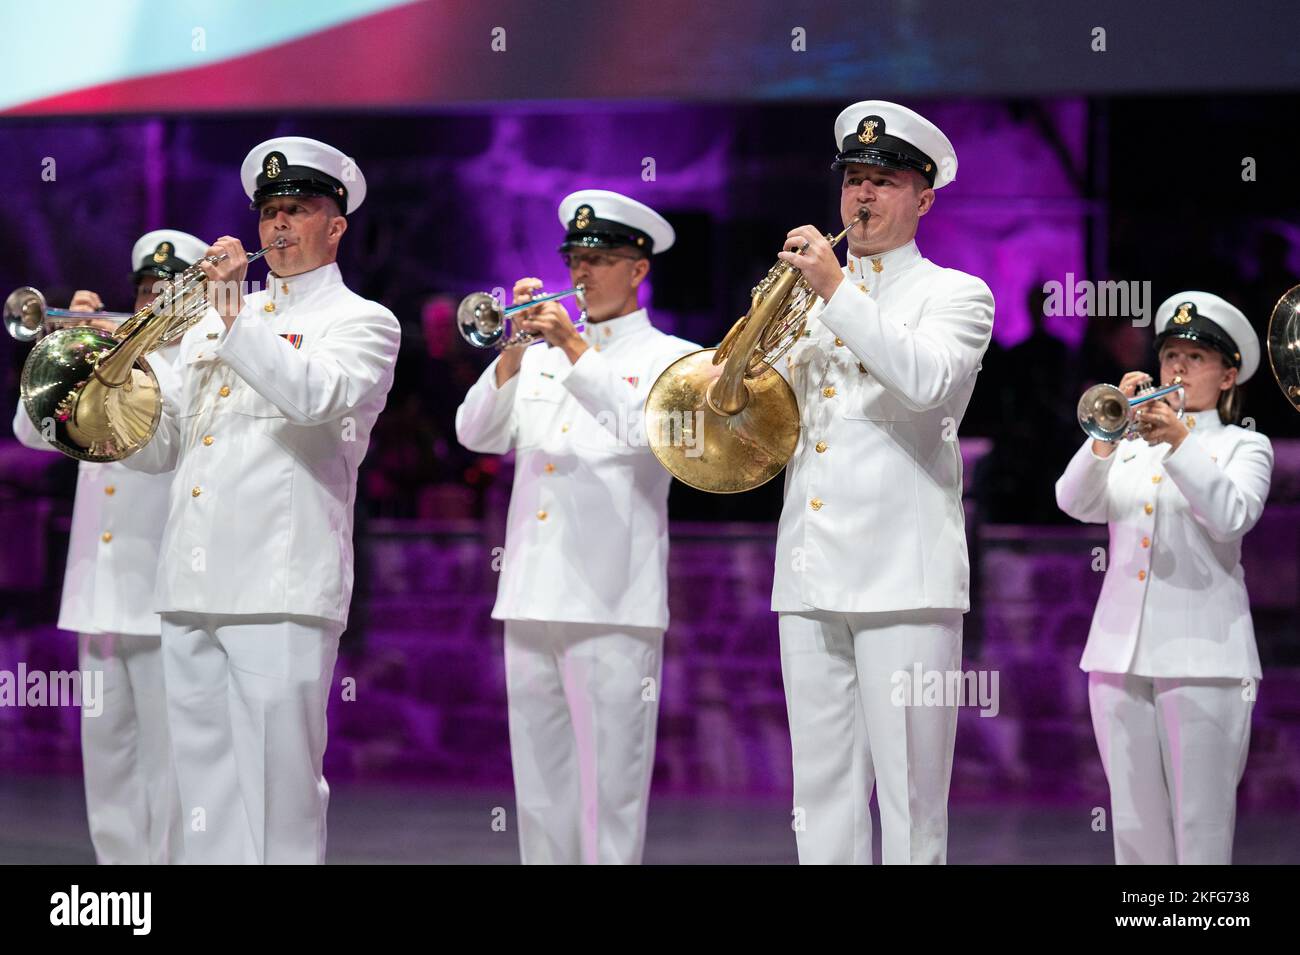 OSLO (Sept. 15, 2022) Members of the United States Navy Band perform during a rehearsal for the Norway Military Tattoo at the Oslo Spektrum in Oslo, Norway. The Navy Band participated in the 2022 Norway Military Tattoo, performing alongside units from Norway, Germany, Belgium, Sweden, Poland, Estonia, France and the United Kingdom. Stock Photo